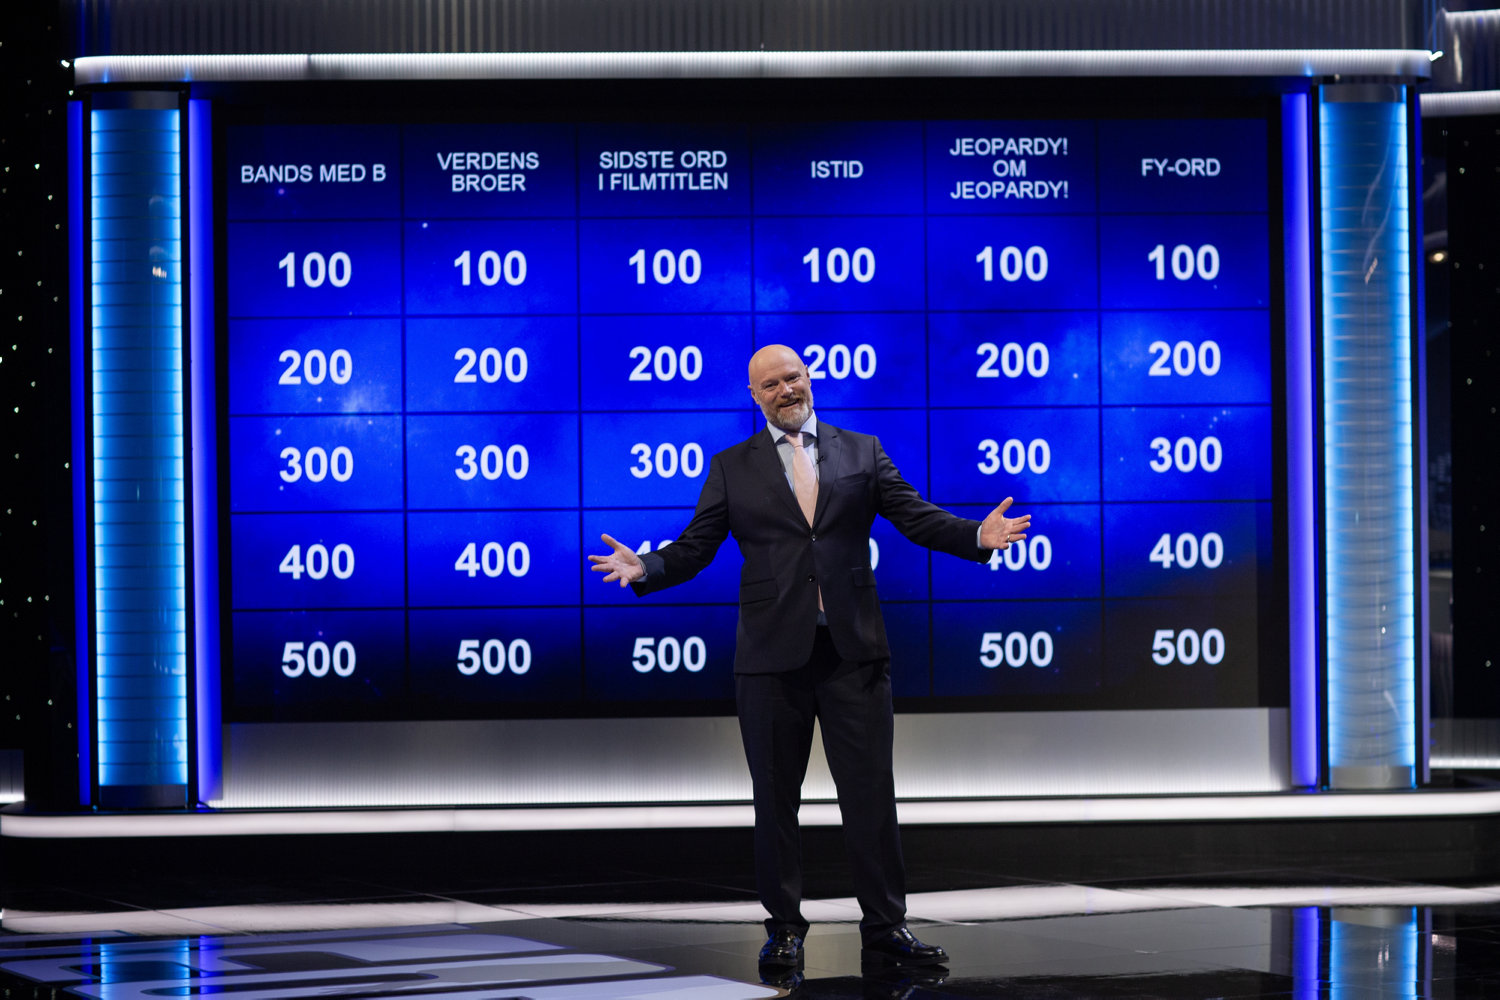 27 kendisser dyster mod hinanden i ny jeopardy-satsning